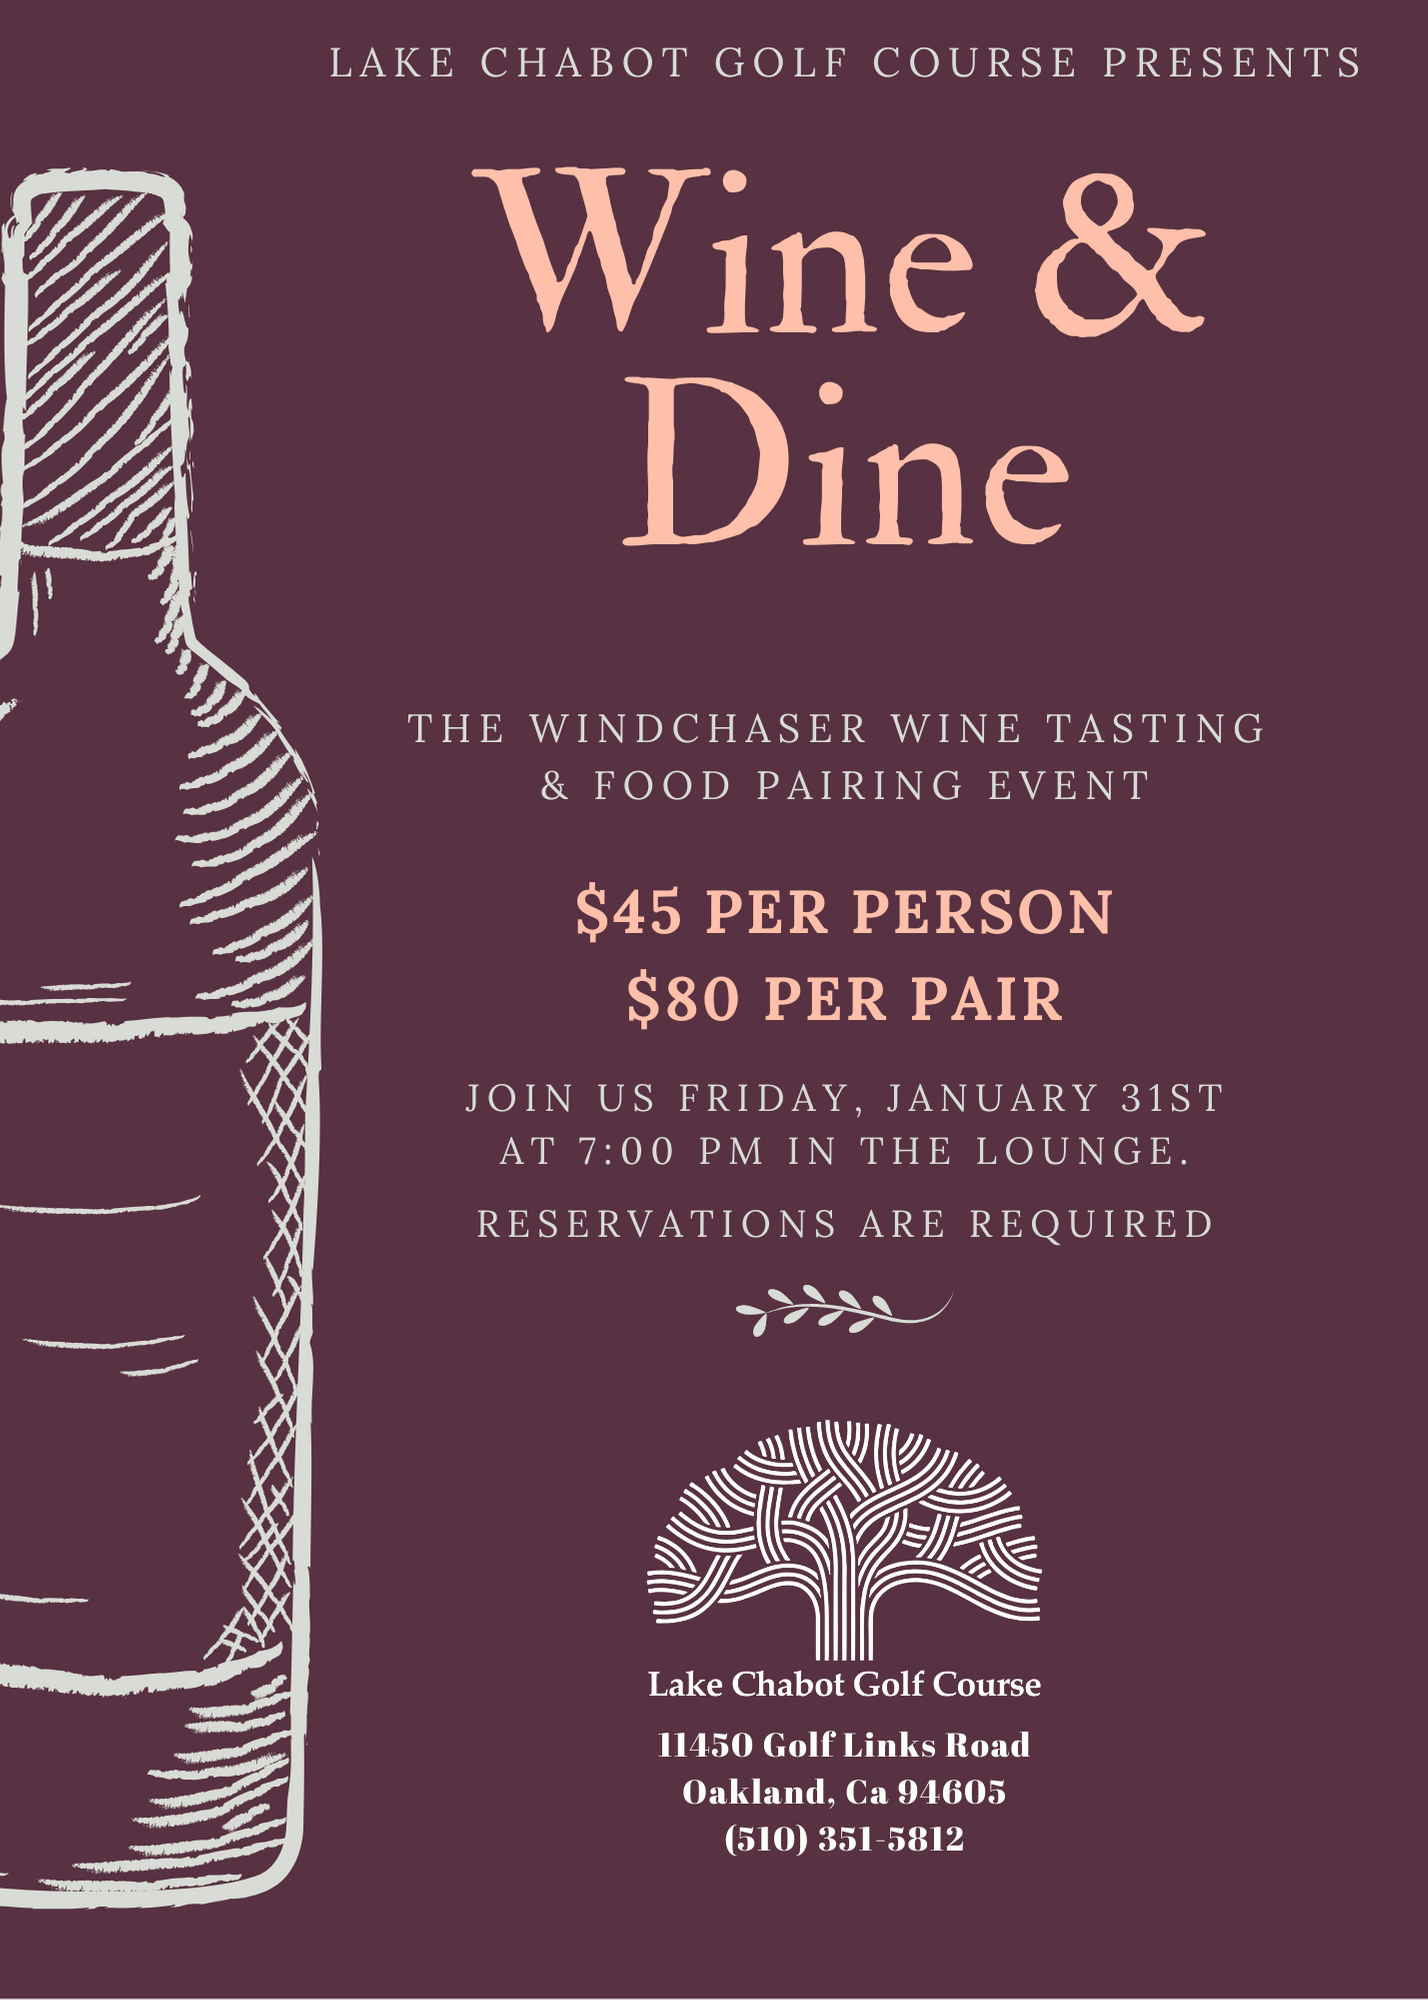 Wine & Dine at Lake Chabot Golf Course